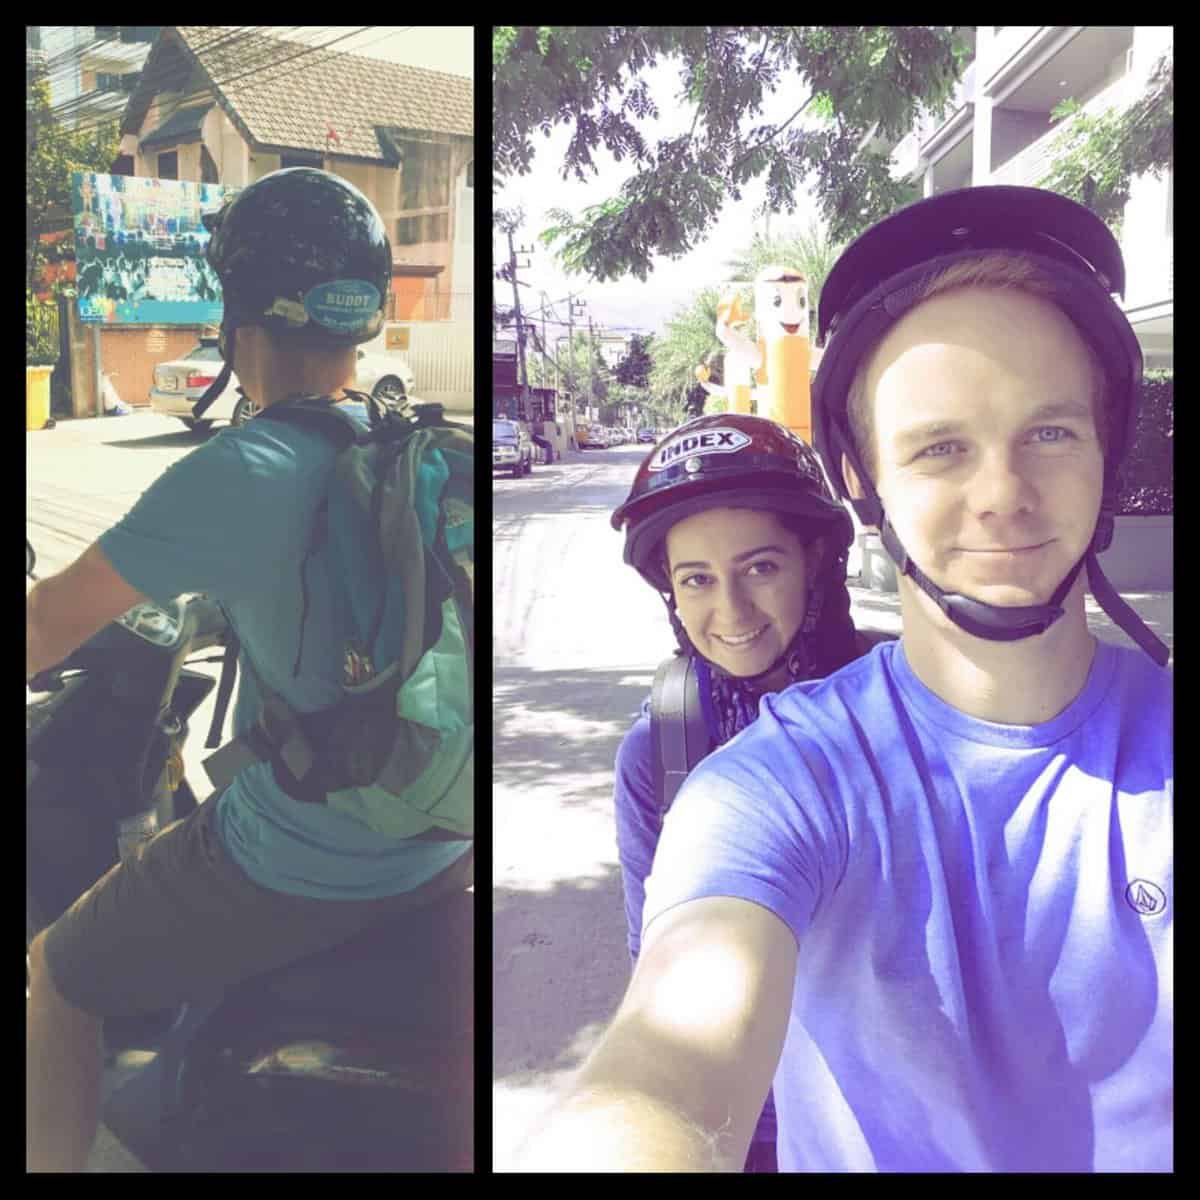 Motorbike riding - Together in Thailand